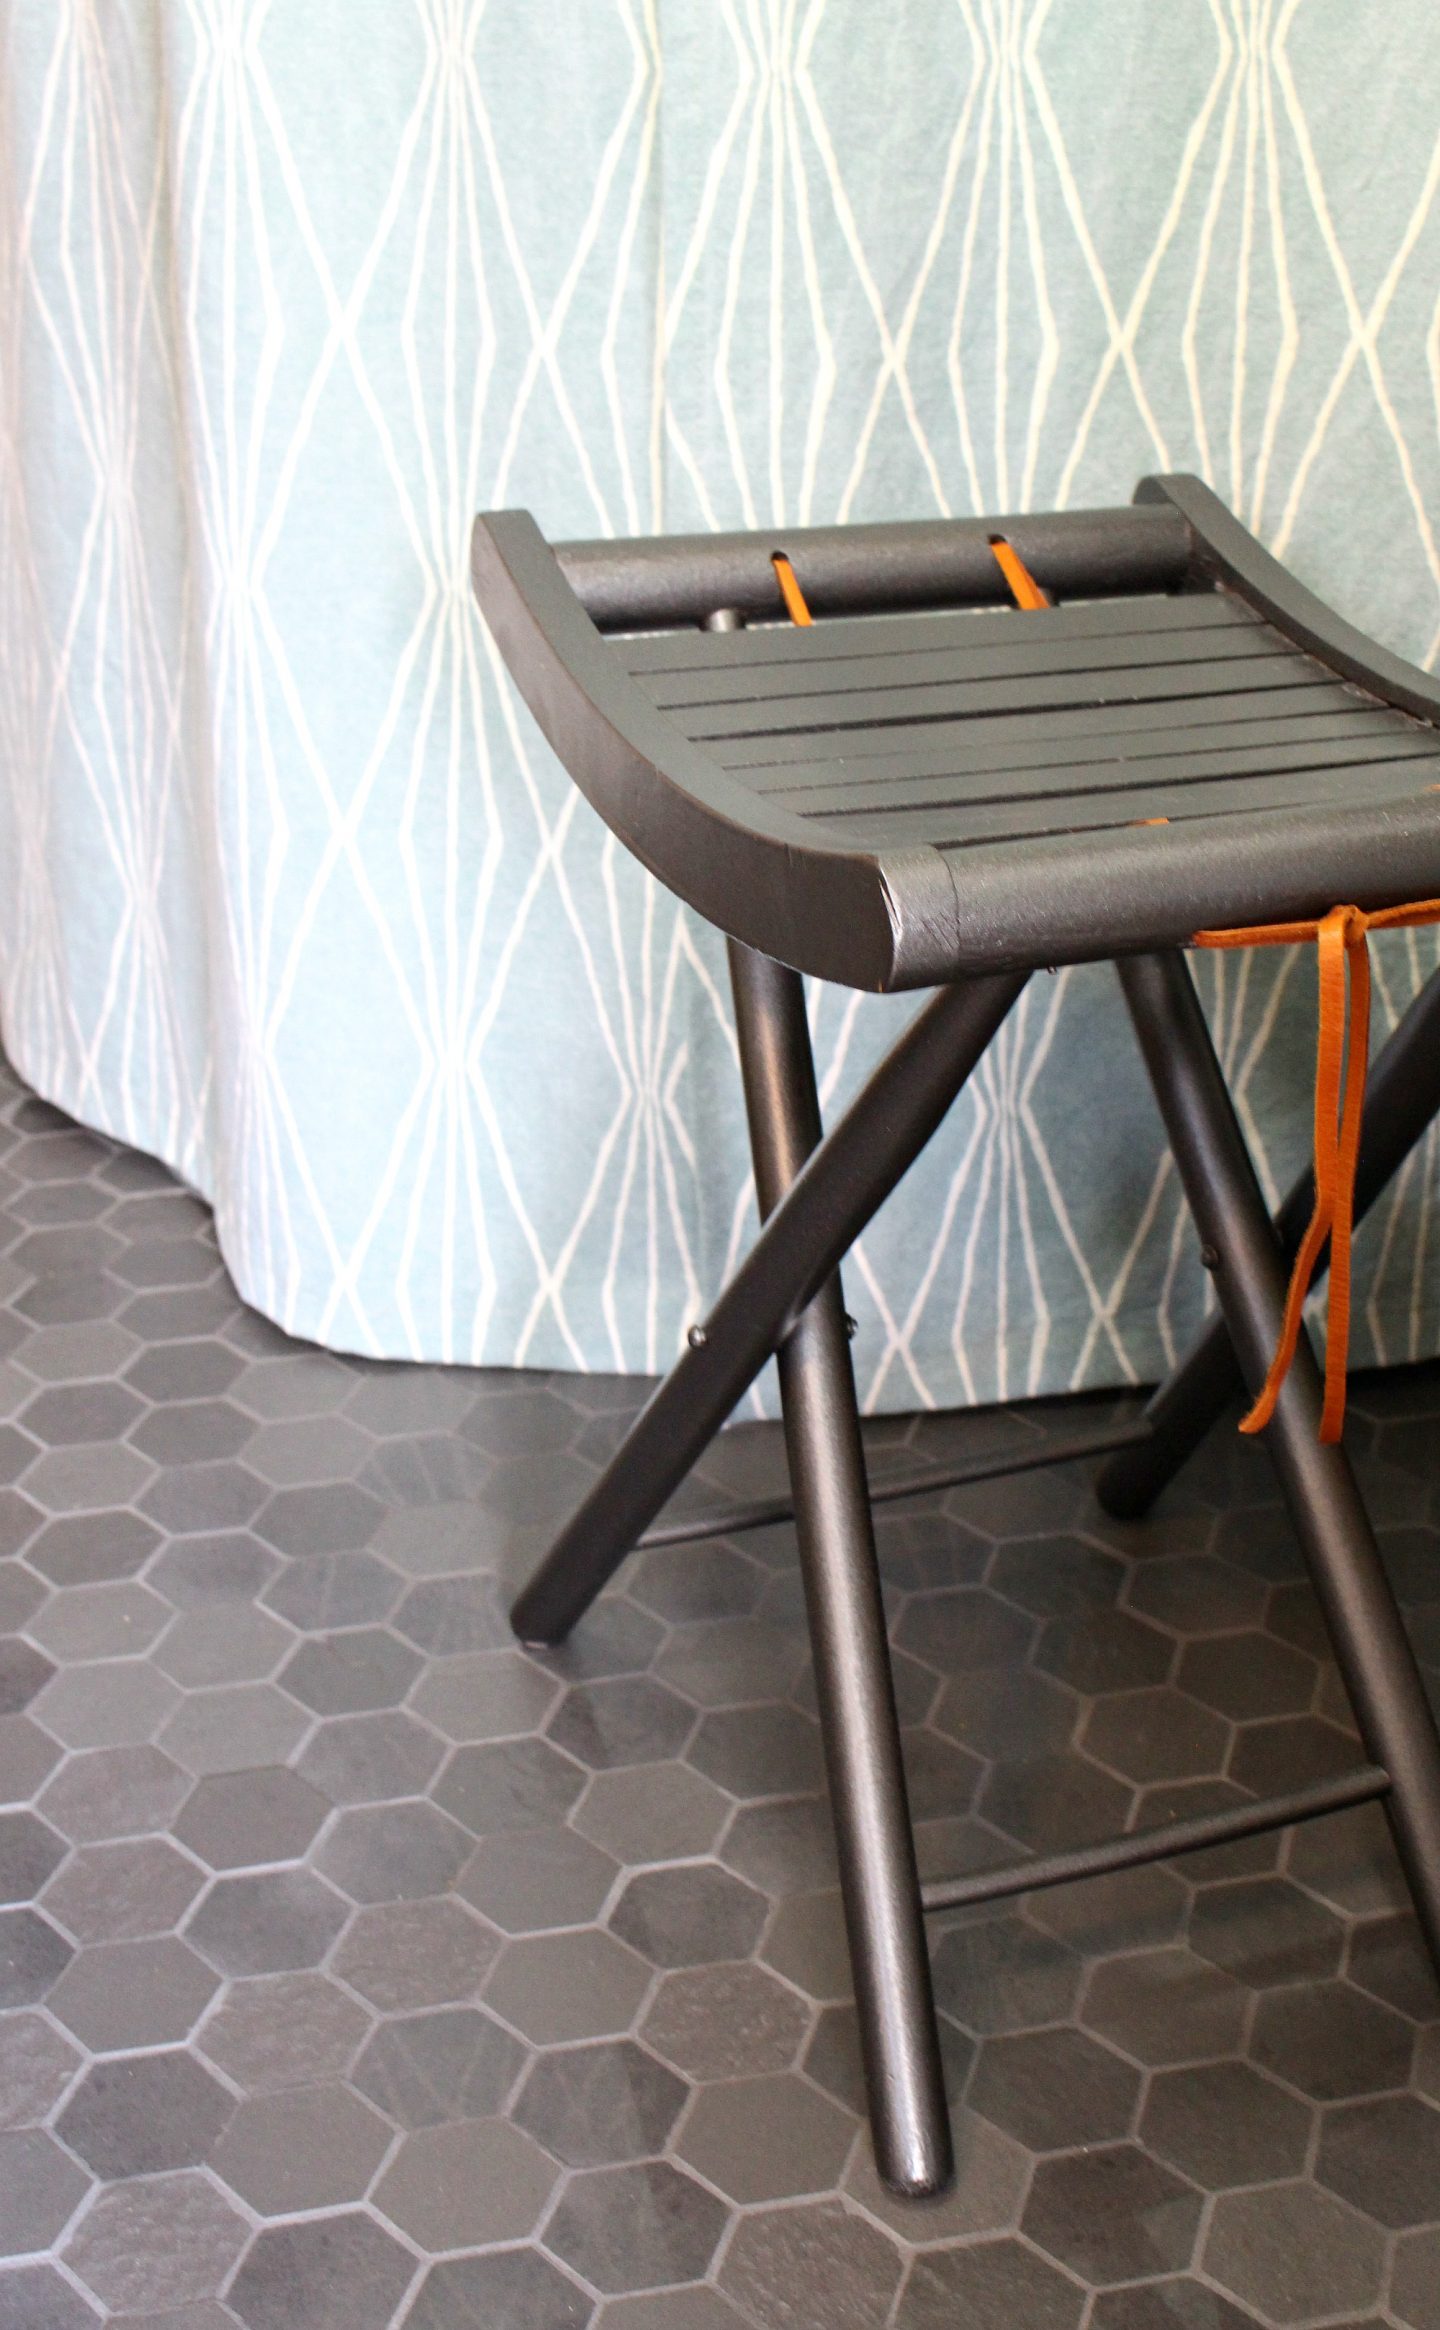 Retro Folding Stool Makeover | Before + After | Budget-friendly Furniture Makeover Vintage Upcycle Spray Paint Makeover #furnituremakeover #spraypaint #vintage